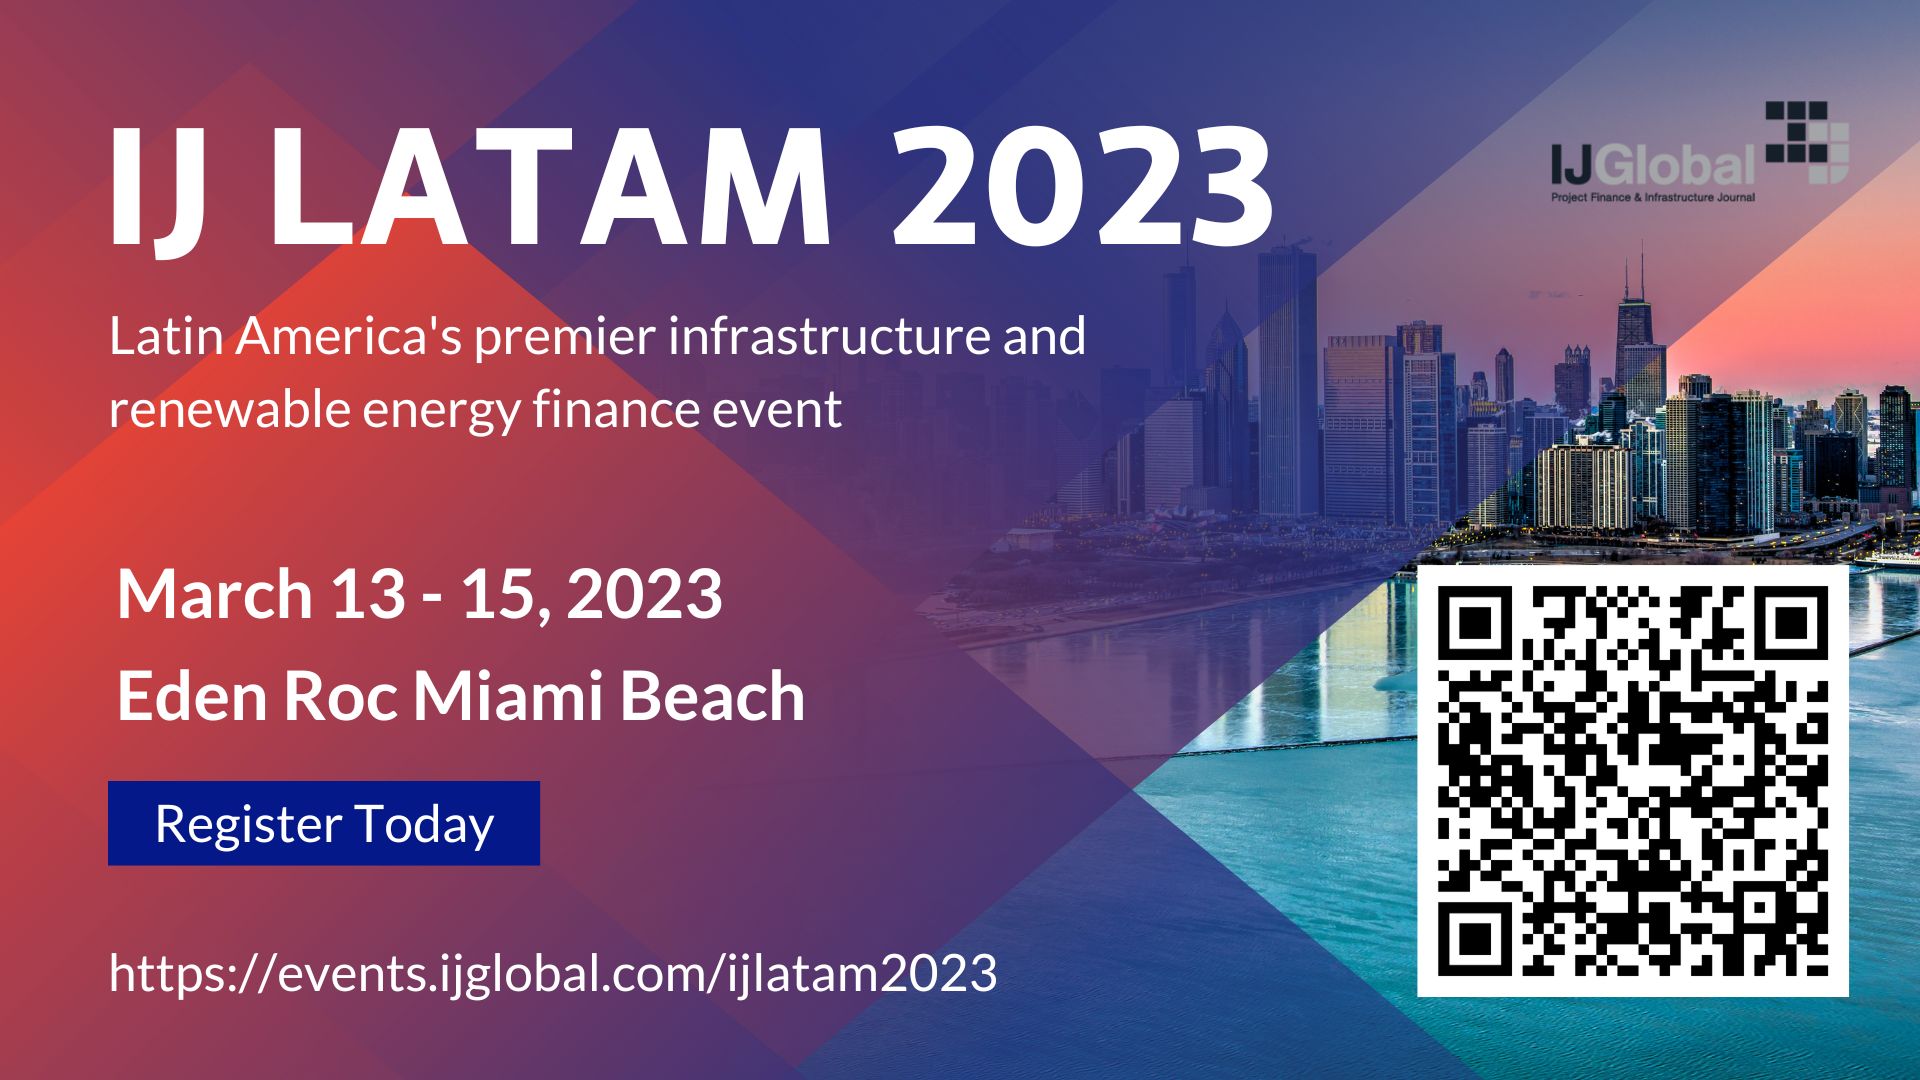 IJ LATAM 2023 - 18th Annual Infrastructure and Renewable Energy Financing Conference